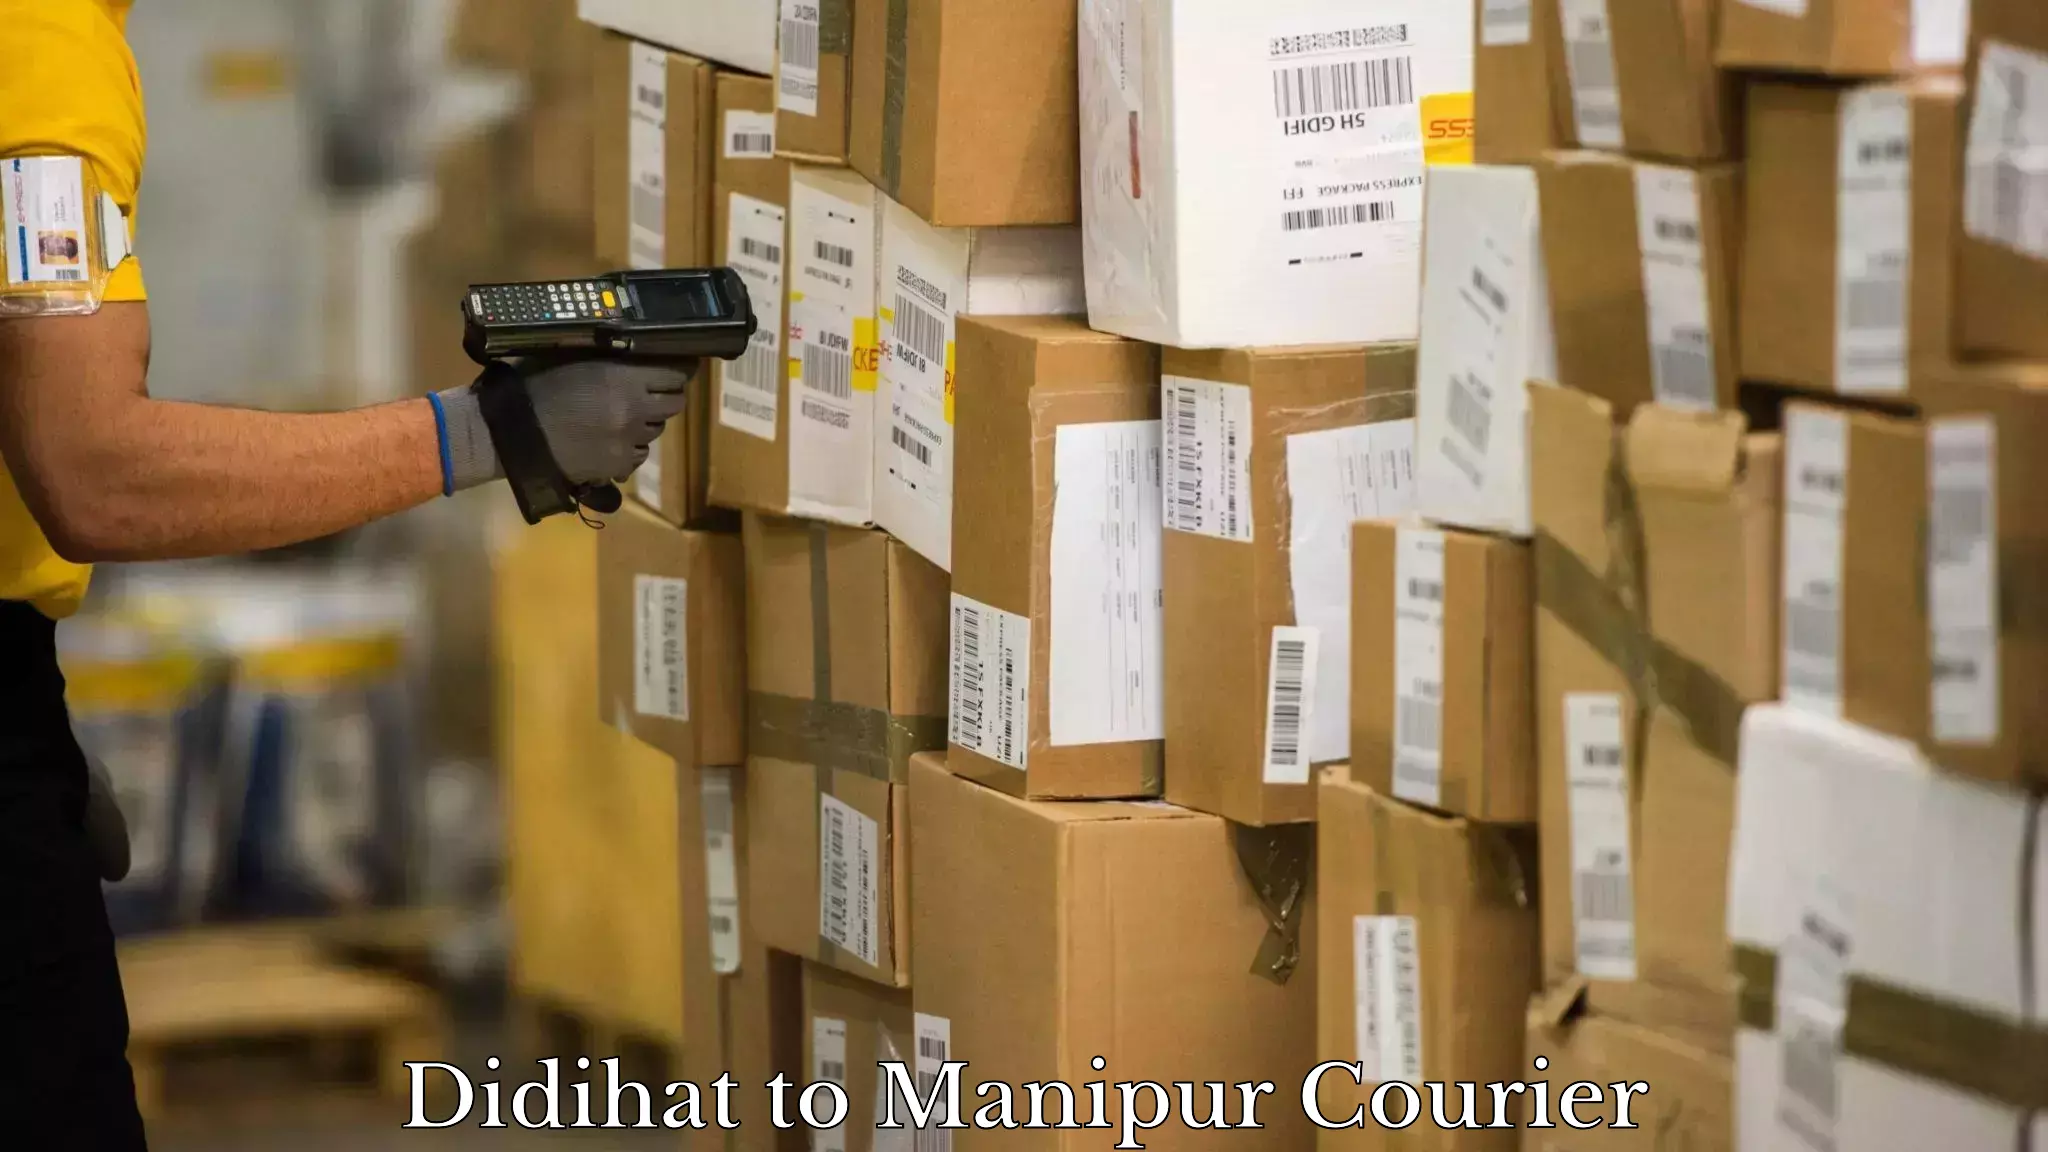 Global shipping networks Didihat to Manipur